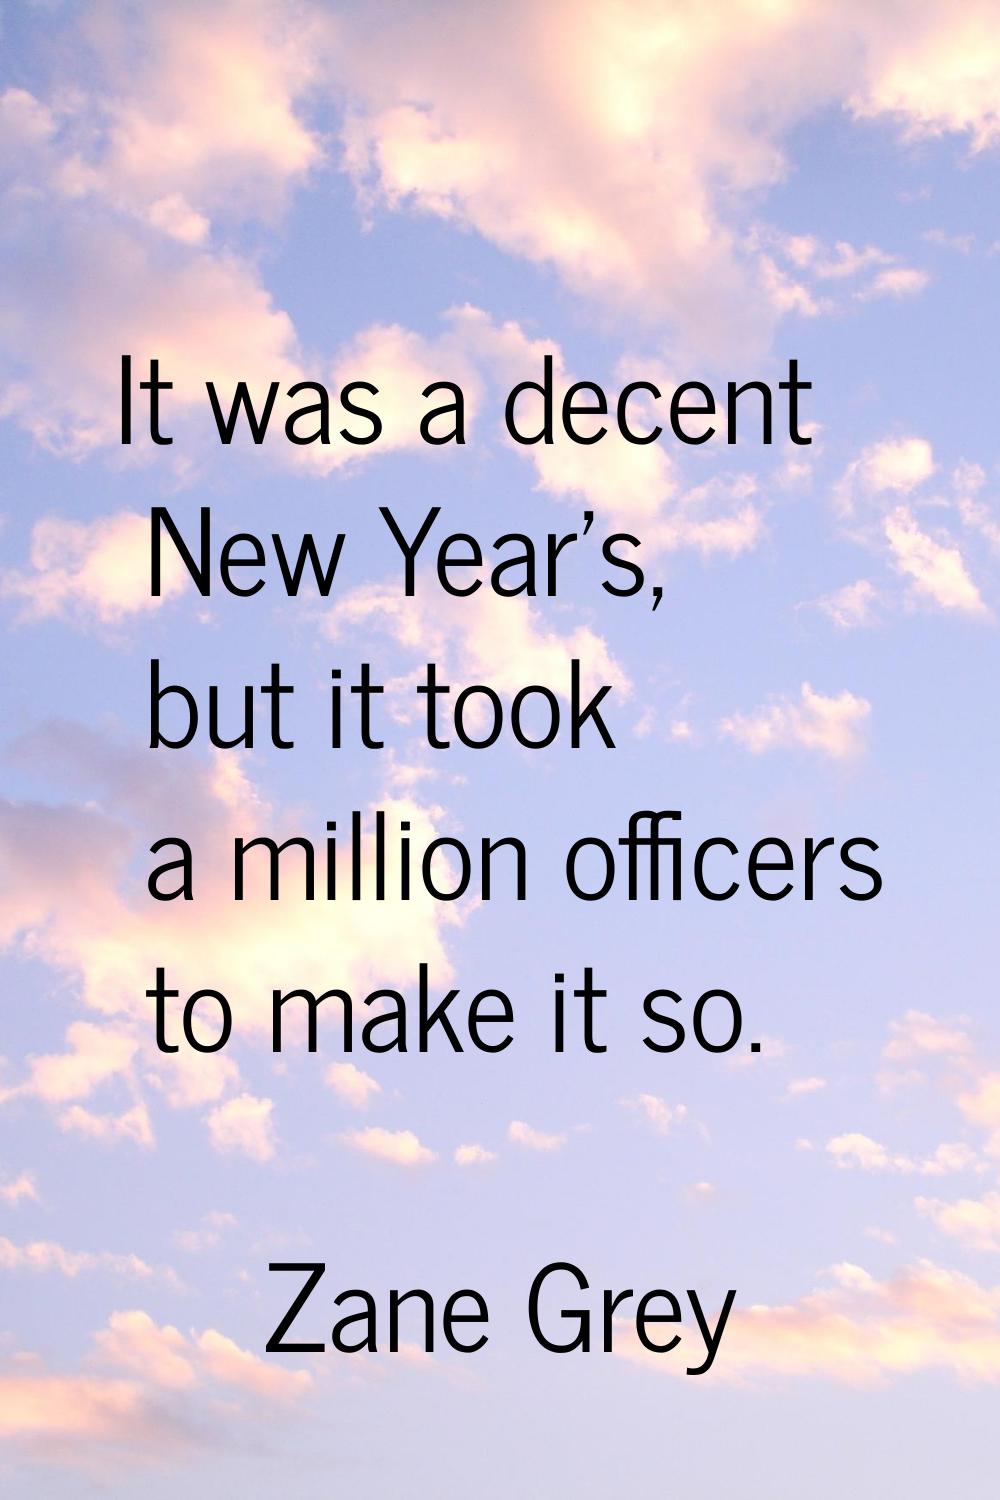 It was a decent New Year's, but it took a million officers to make it so.